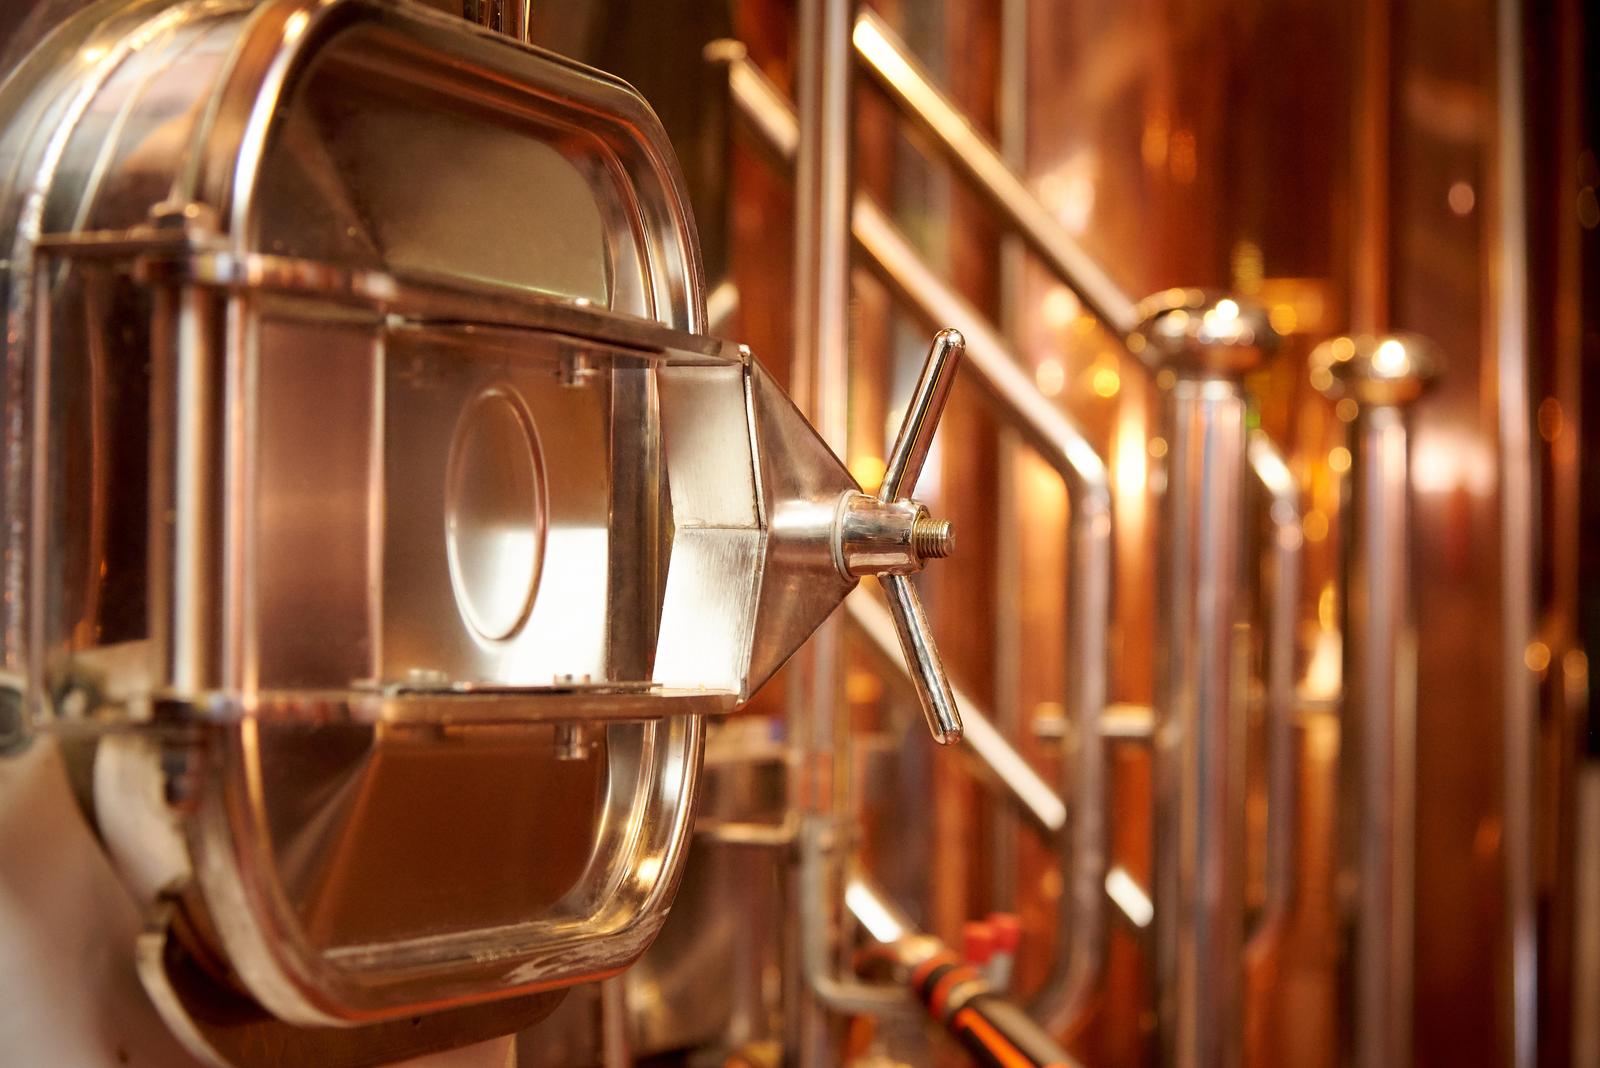 Distilling, rectifying and blending of spirits in Hiiu county